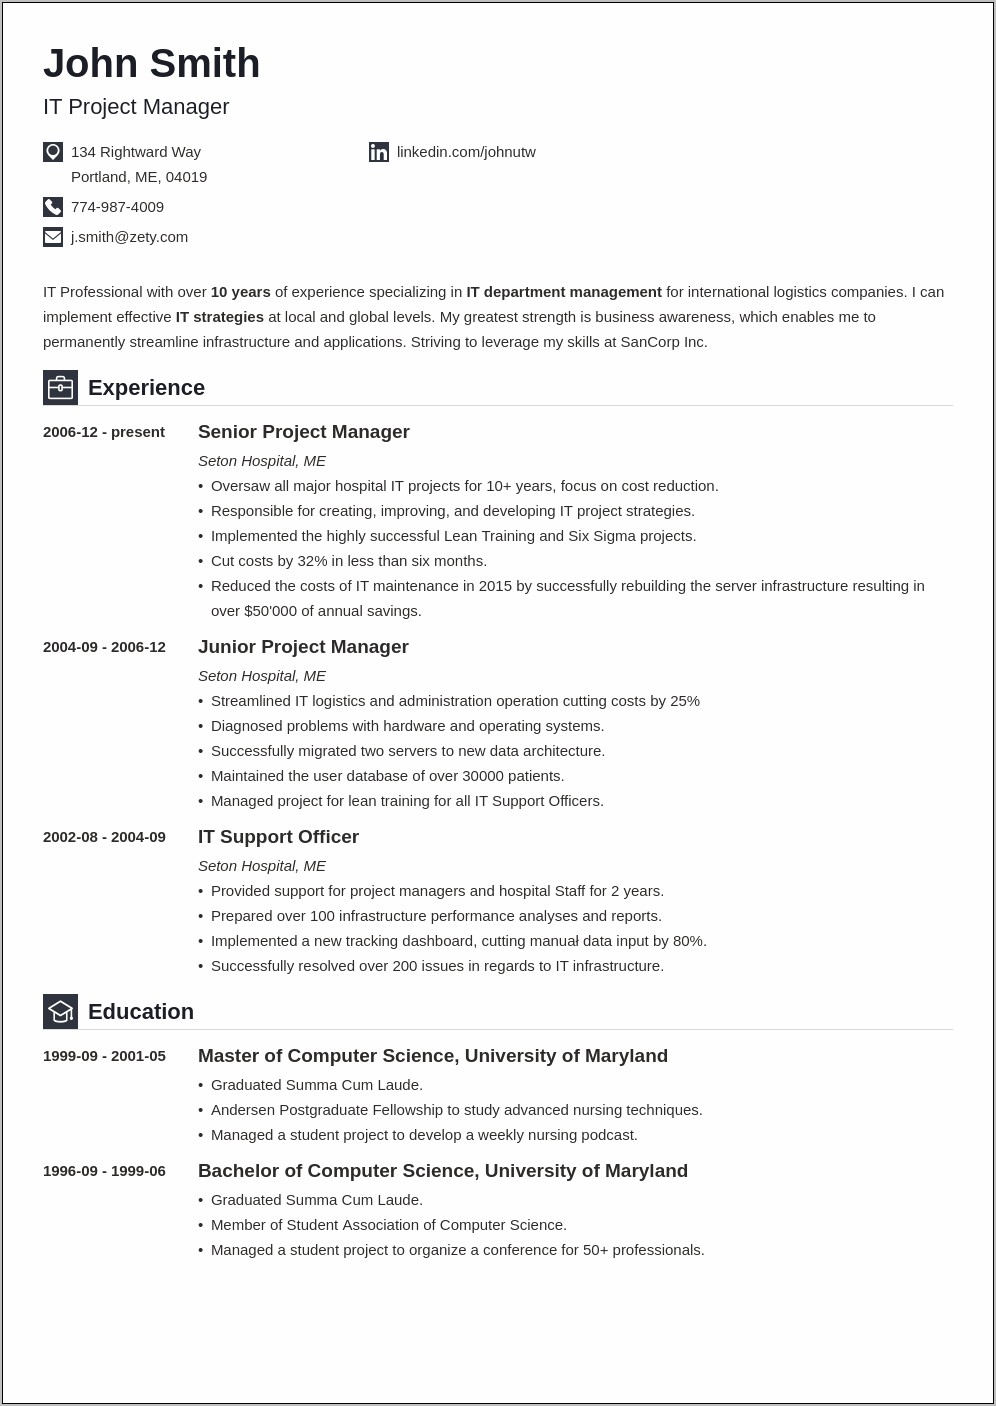 Resume Templates That Don't Look Like Word